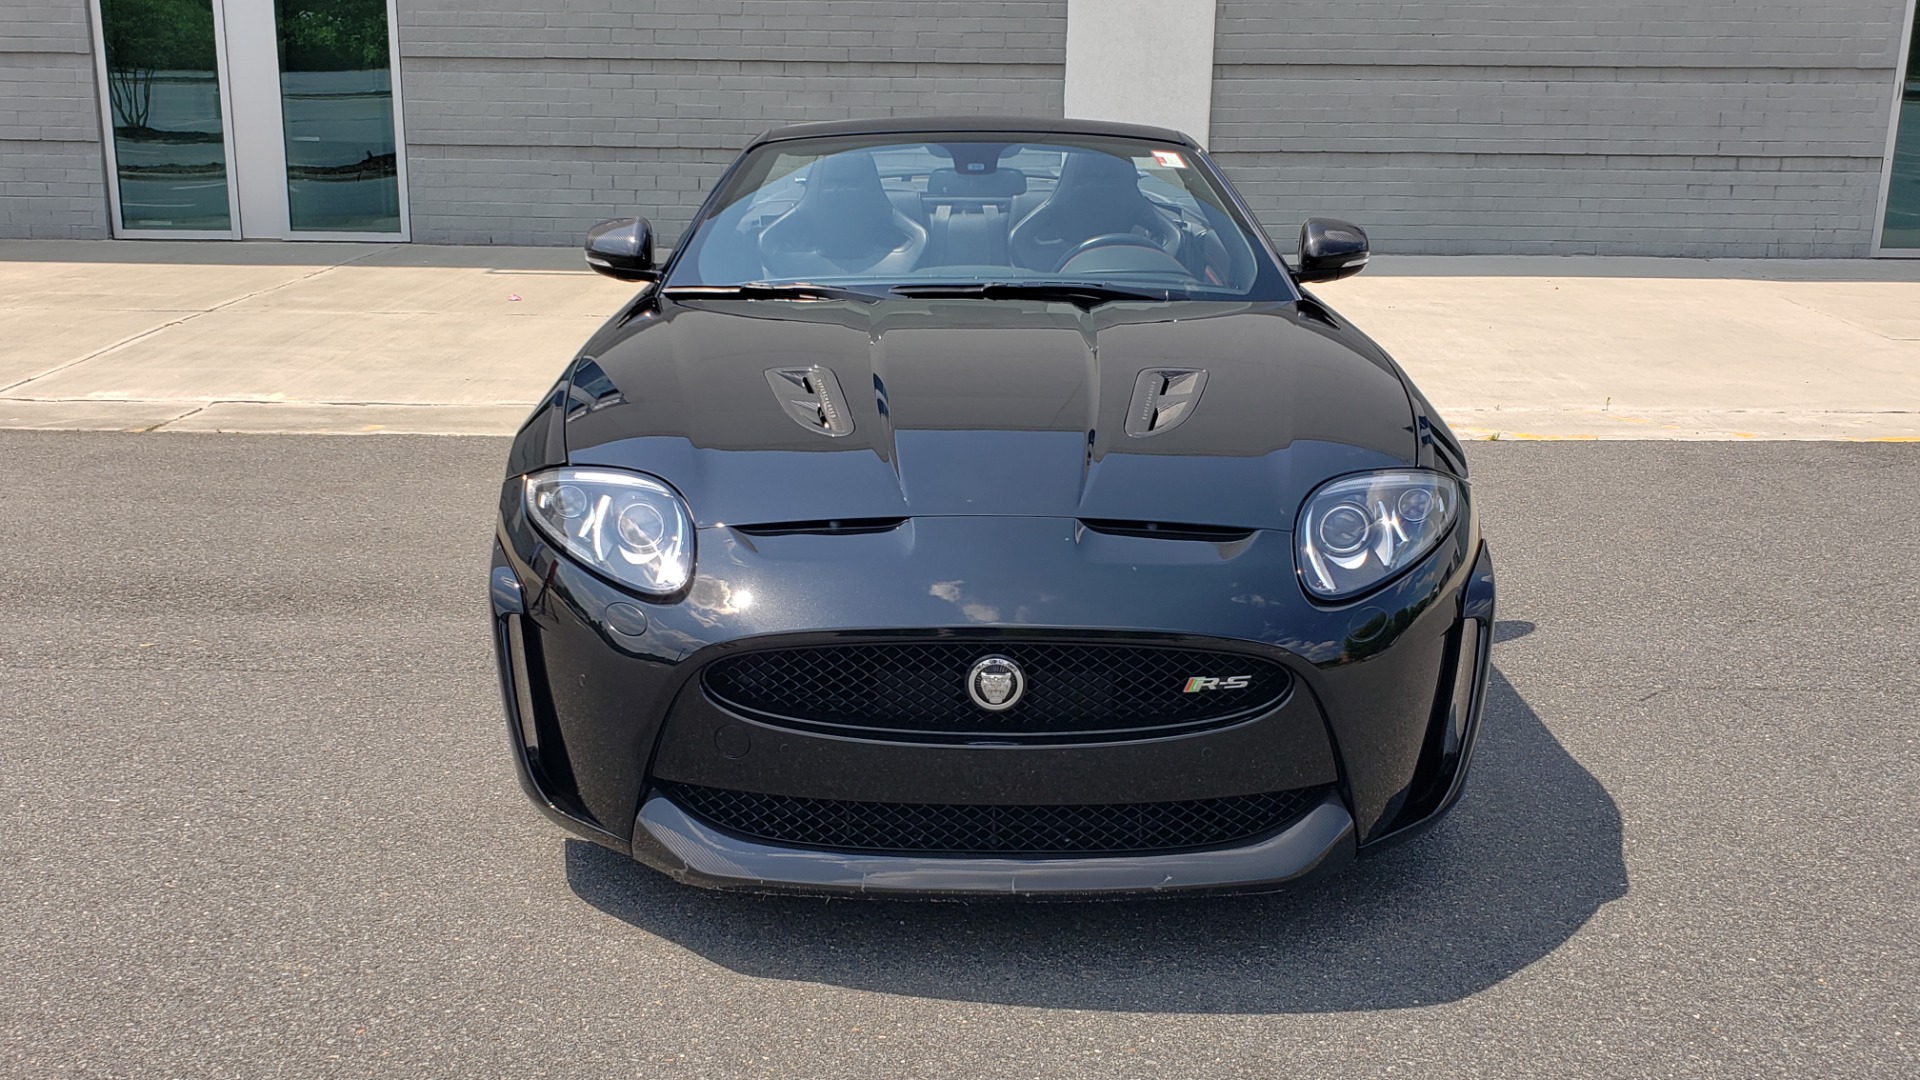 Used 2013 Jaguar XK R-S CONVERTIBLE / SC 5.0L V8 (550HP) / ZF 6-SPD AUTO / NAV / REARVIEW for sale Sold at Formula Imports in Charlotte NC 28227 73